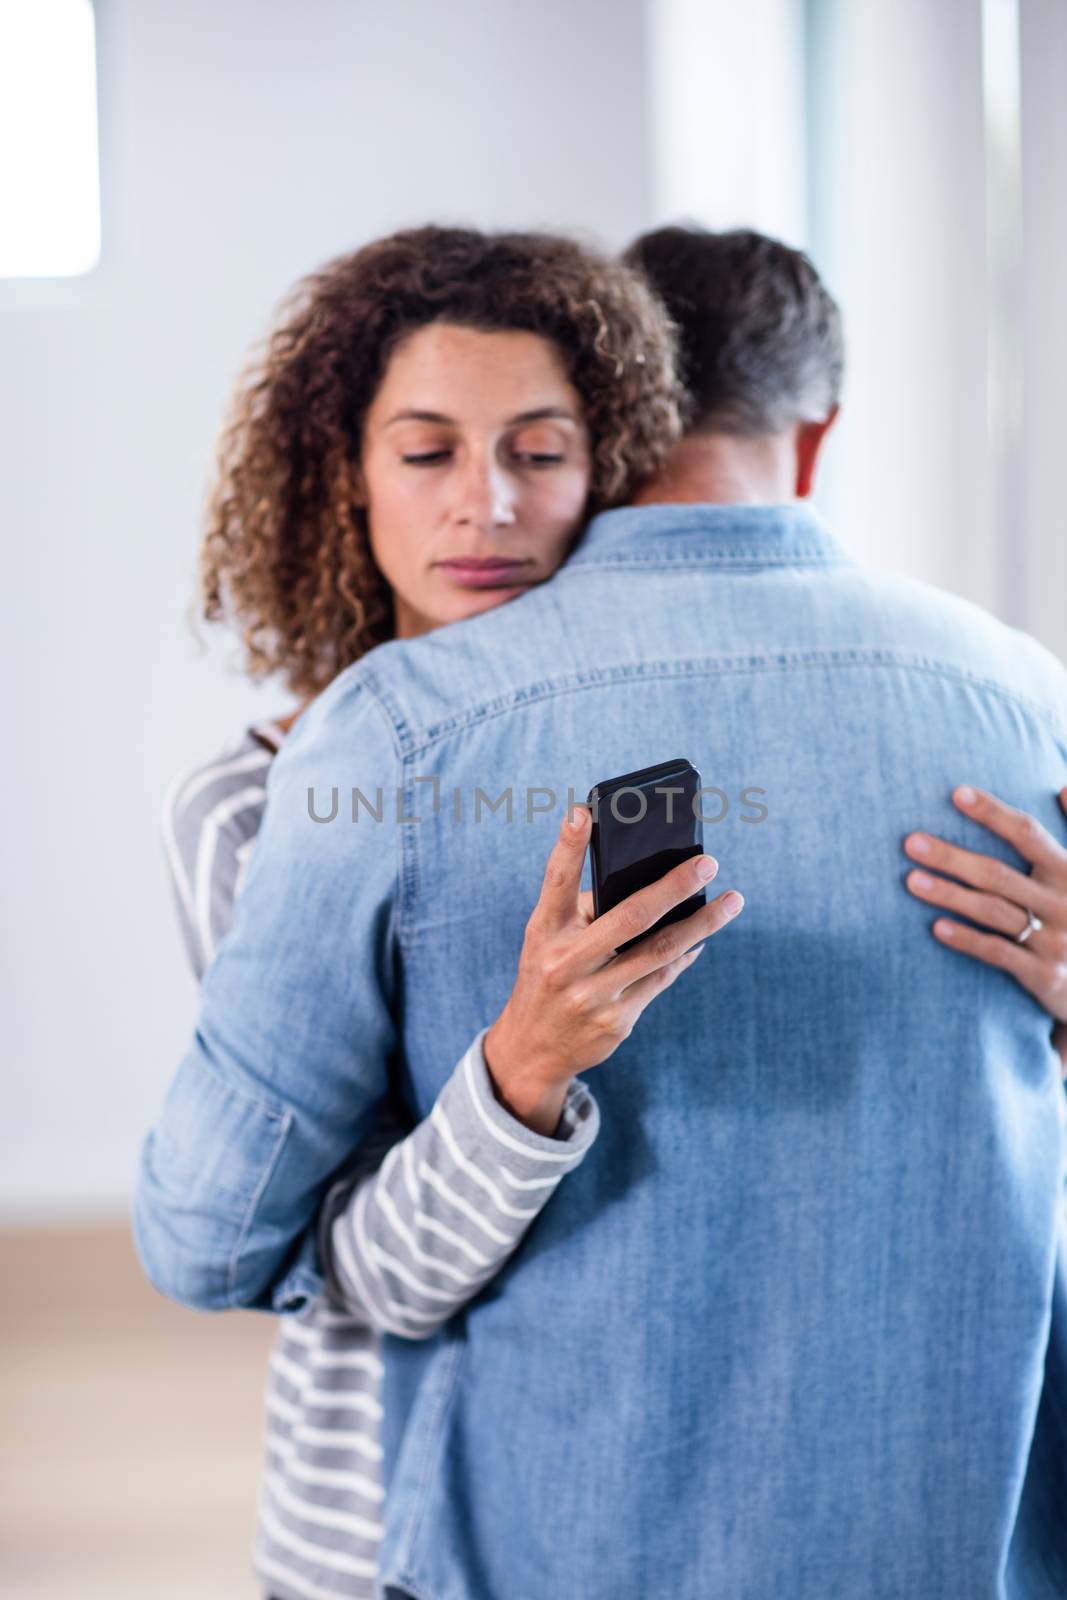 Woman checking her mobile phone while embracing a man at home